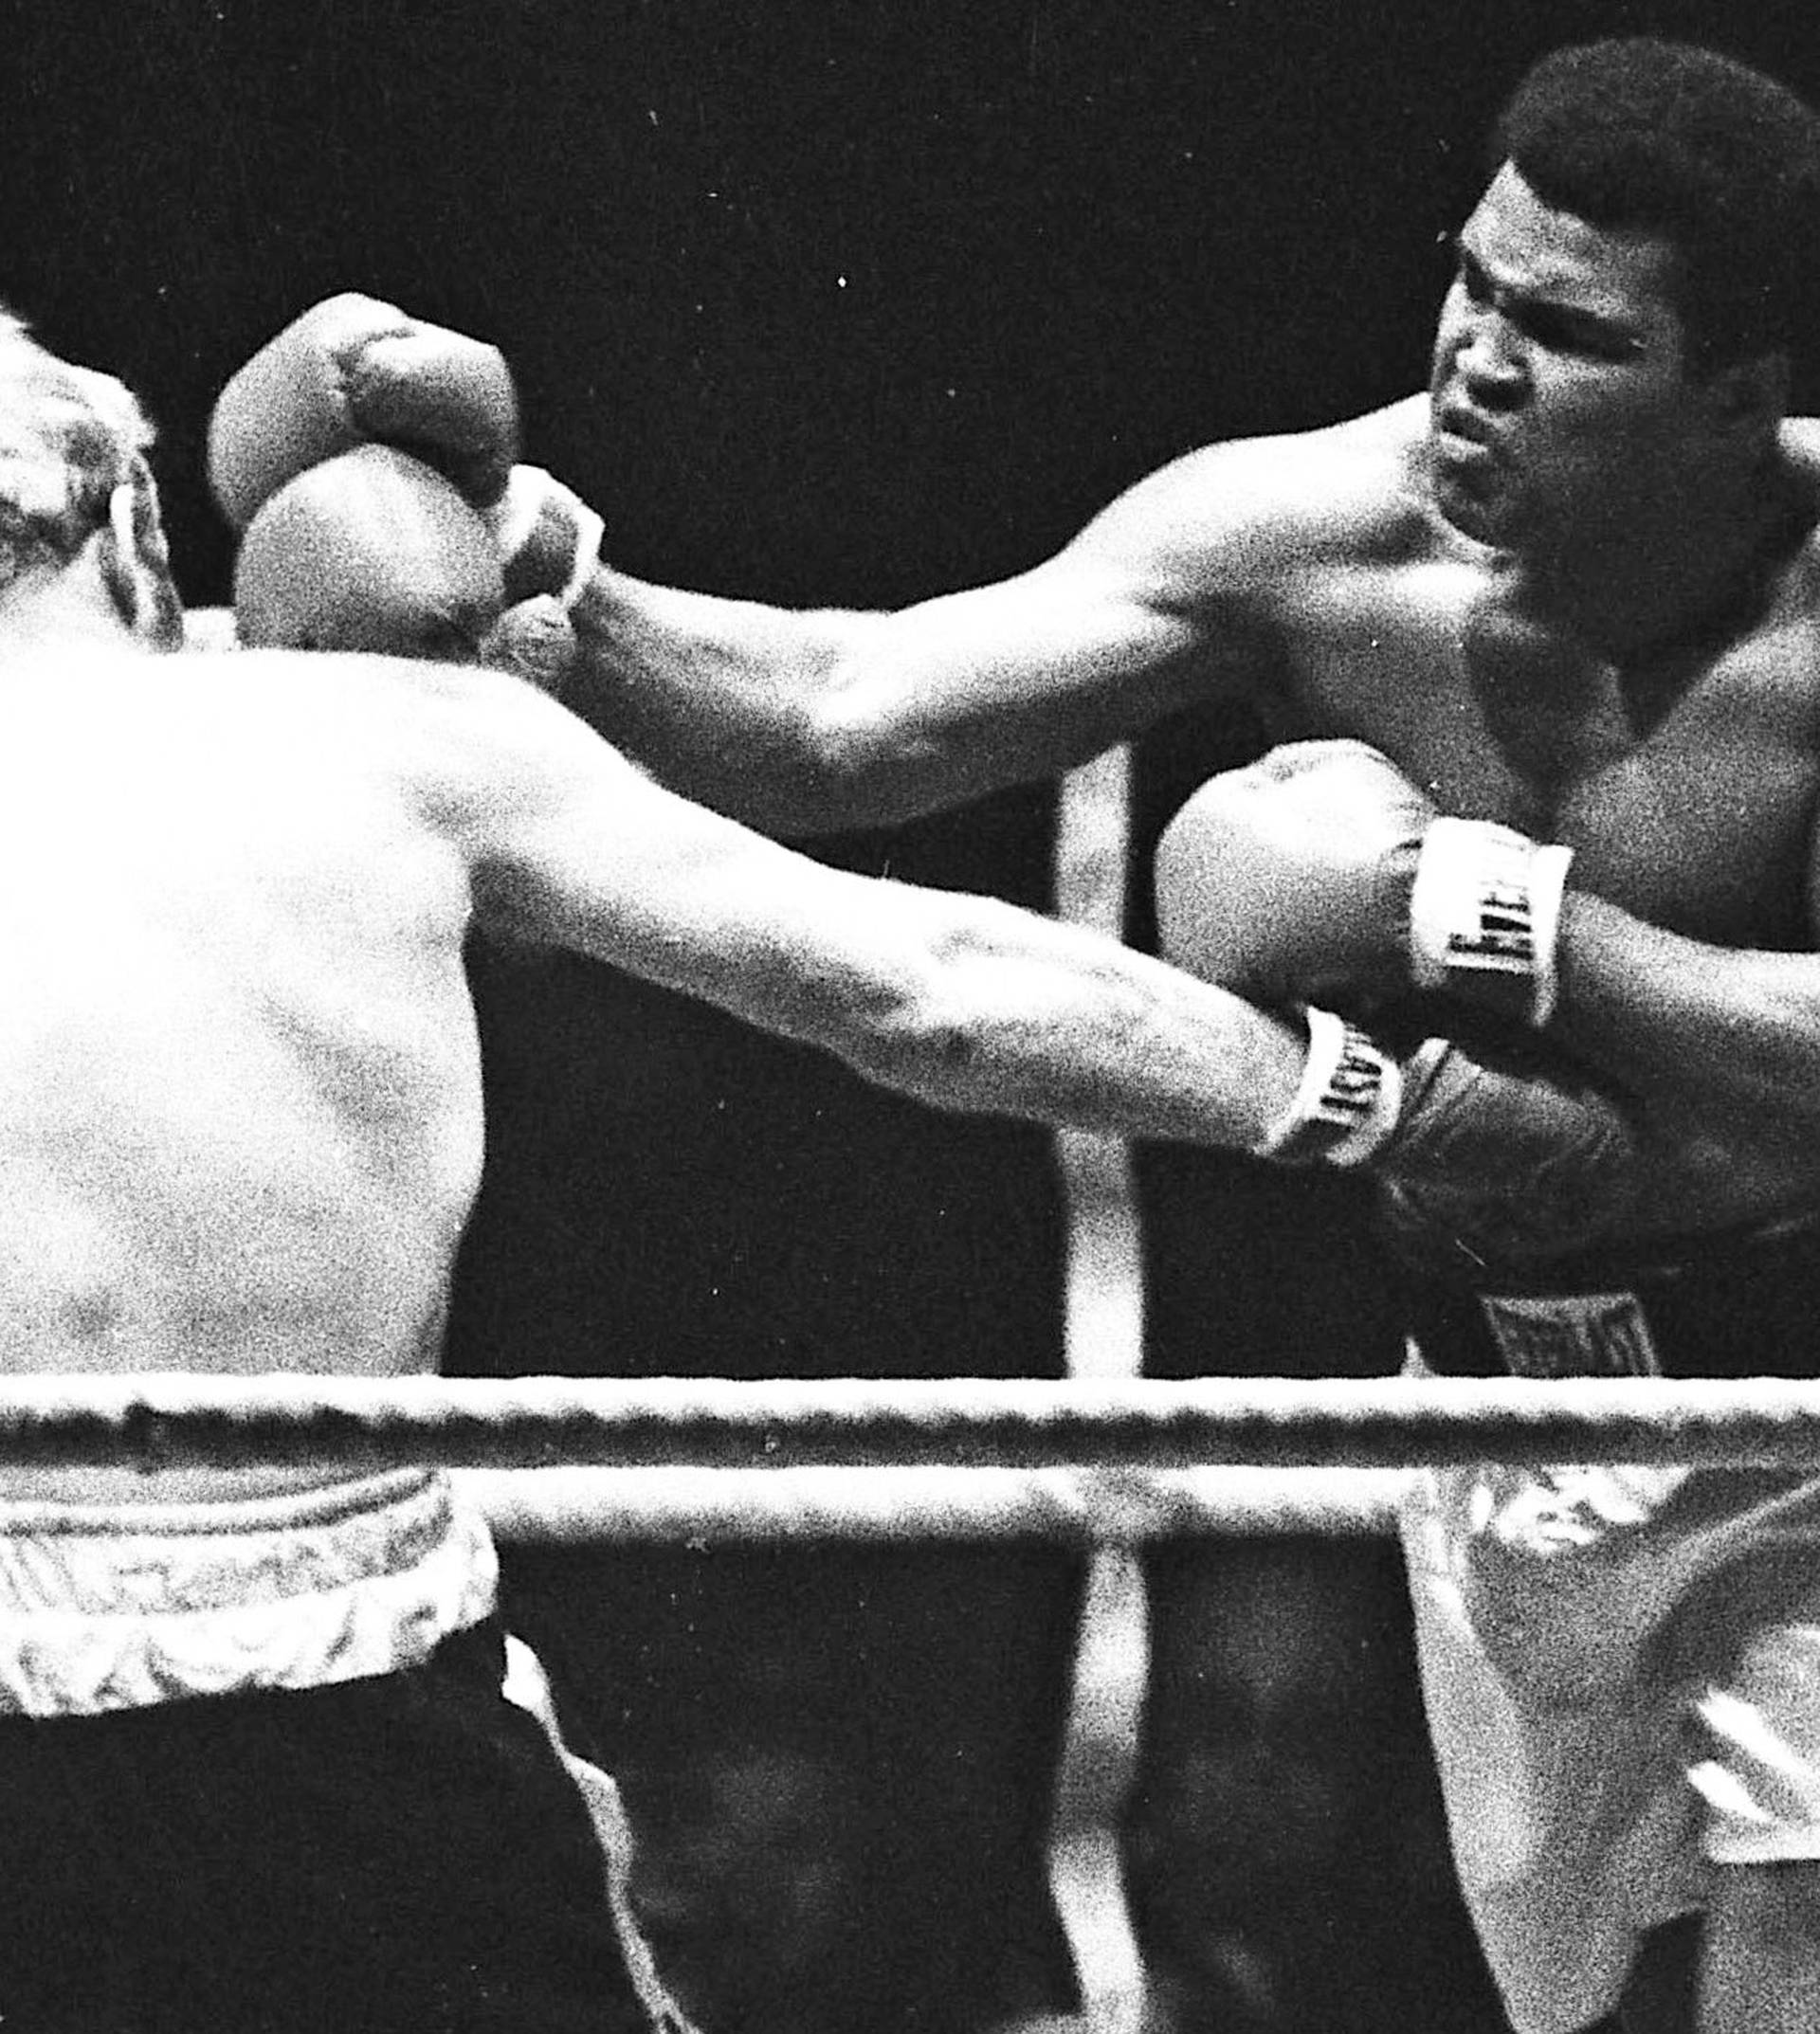 Muhammad Ali punches Richard Dunn while fighting for the WBC & WBA Heavyweight Title in Munich